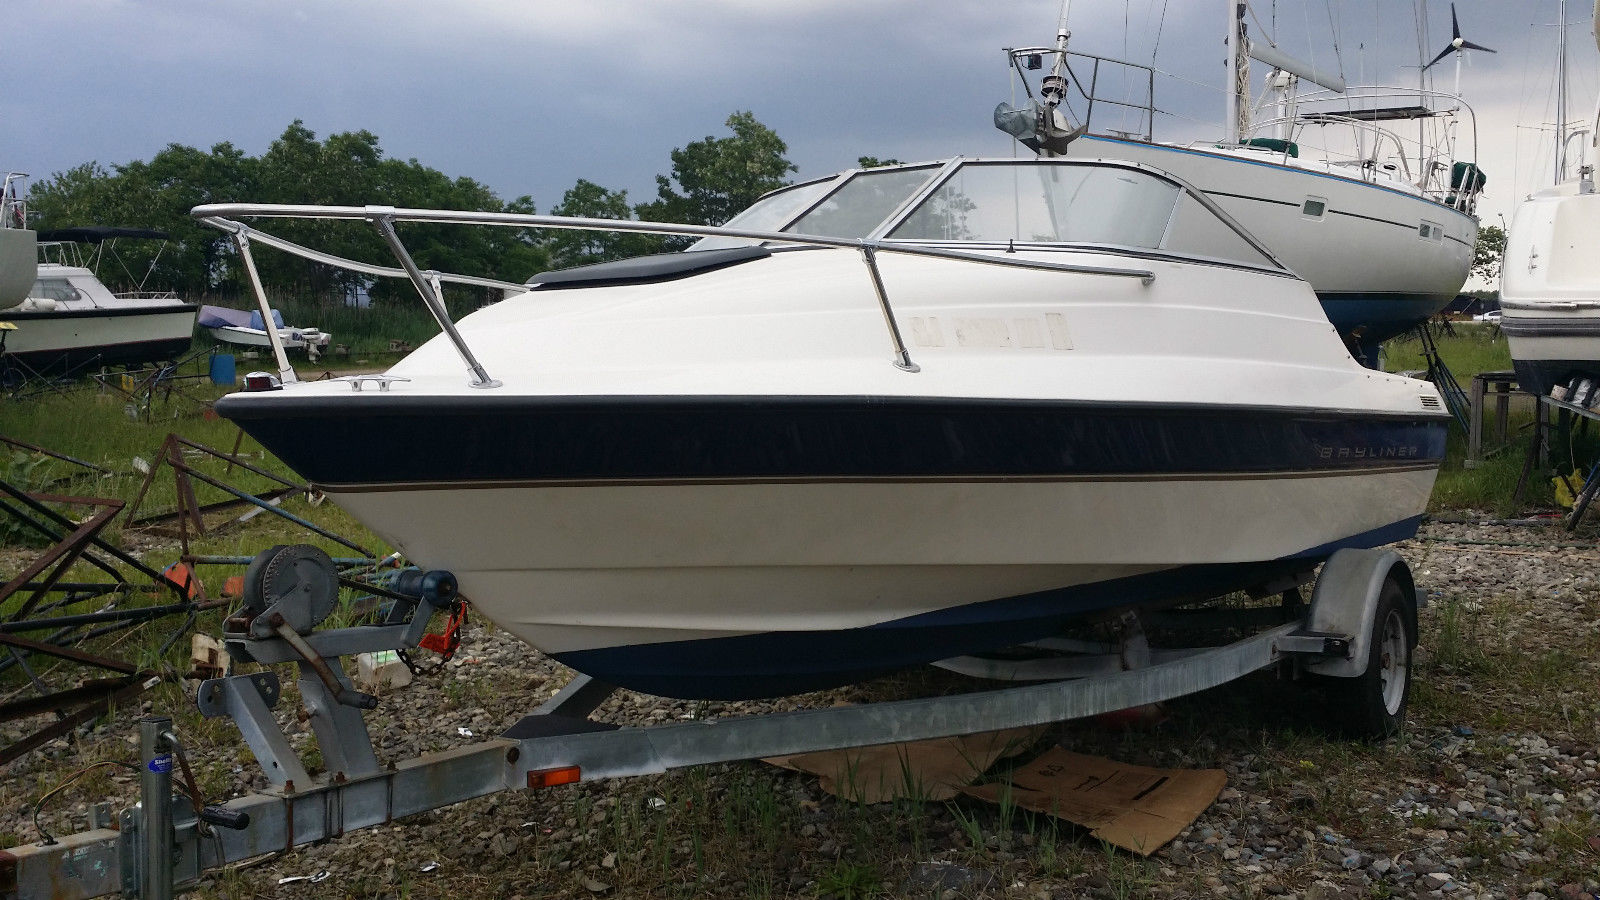 Bayliner 1952 boat for sale from USA